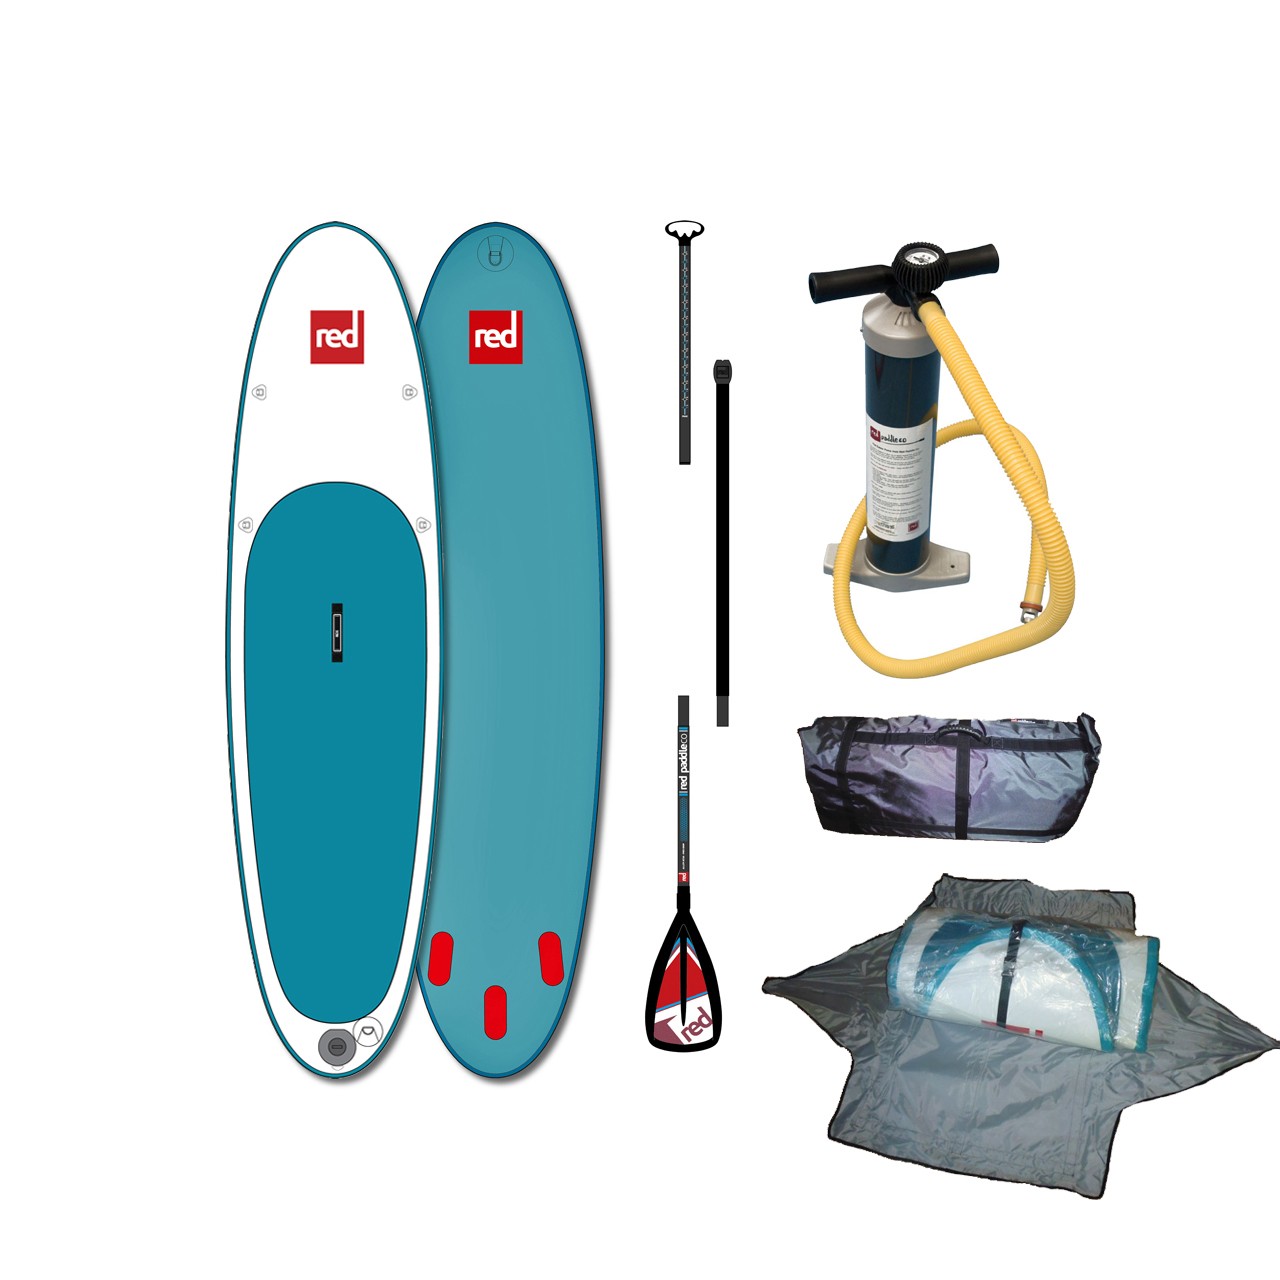 Red Paddle iSUP 10'6" - Board + Pumpe + Paddel